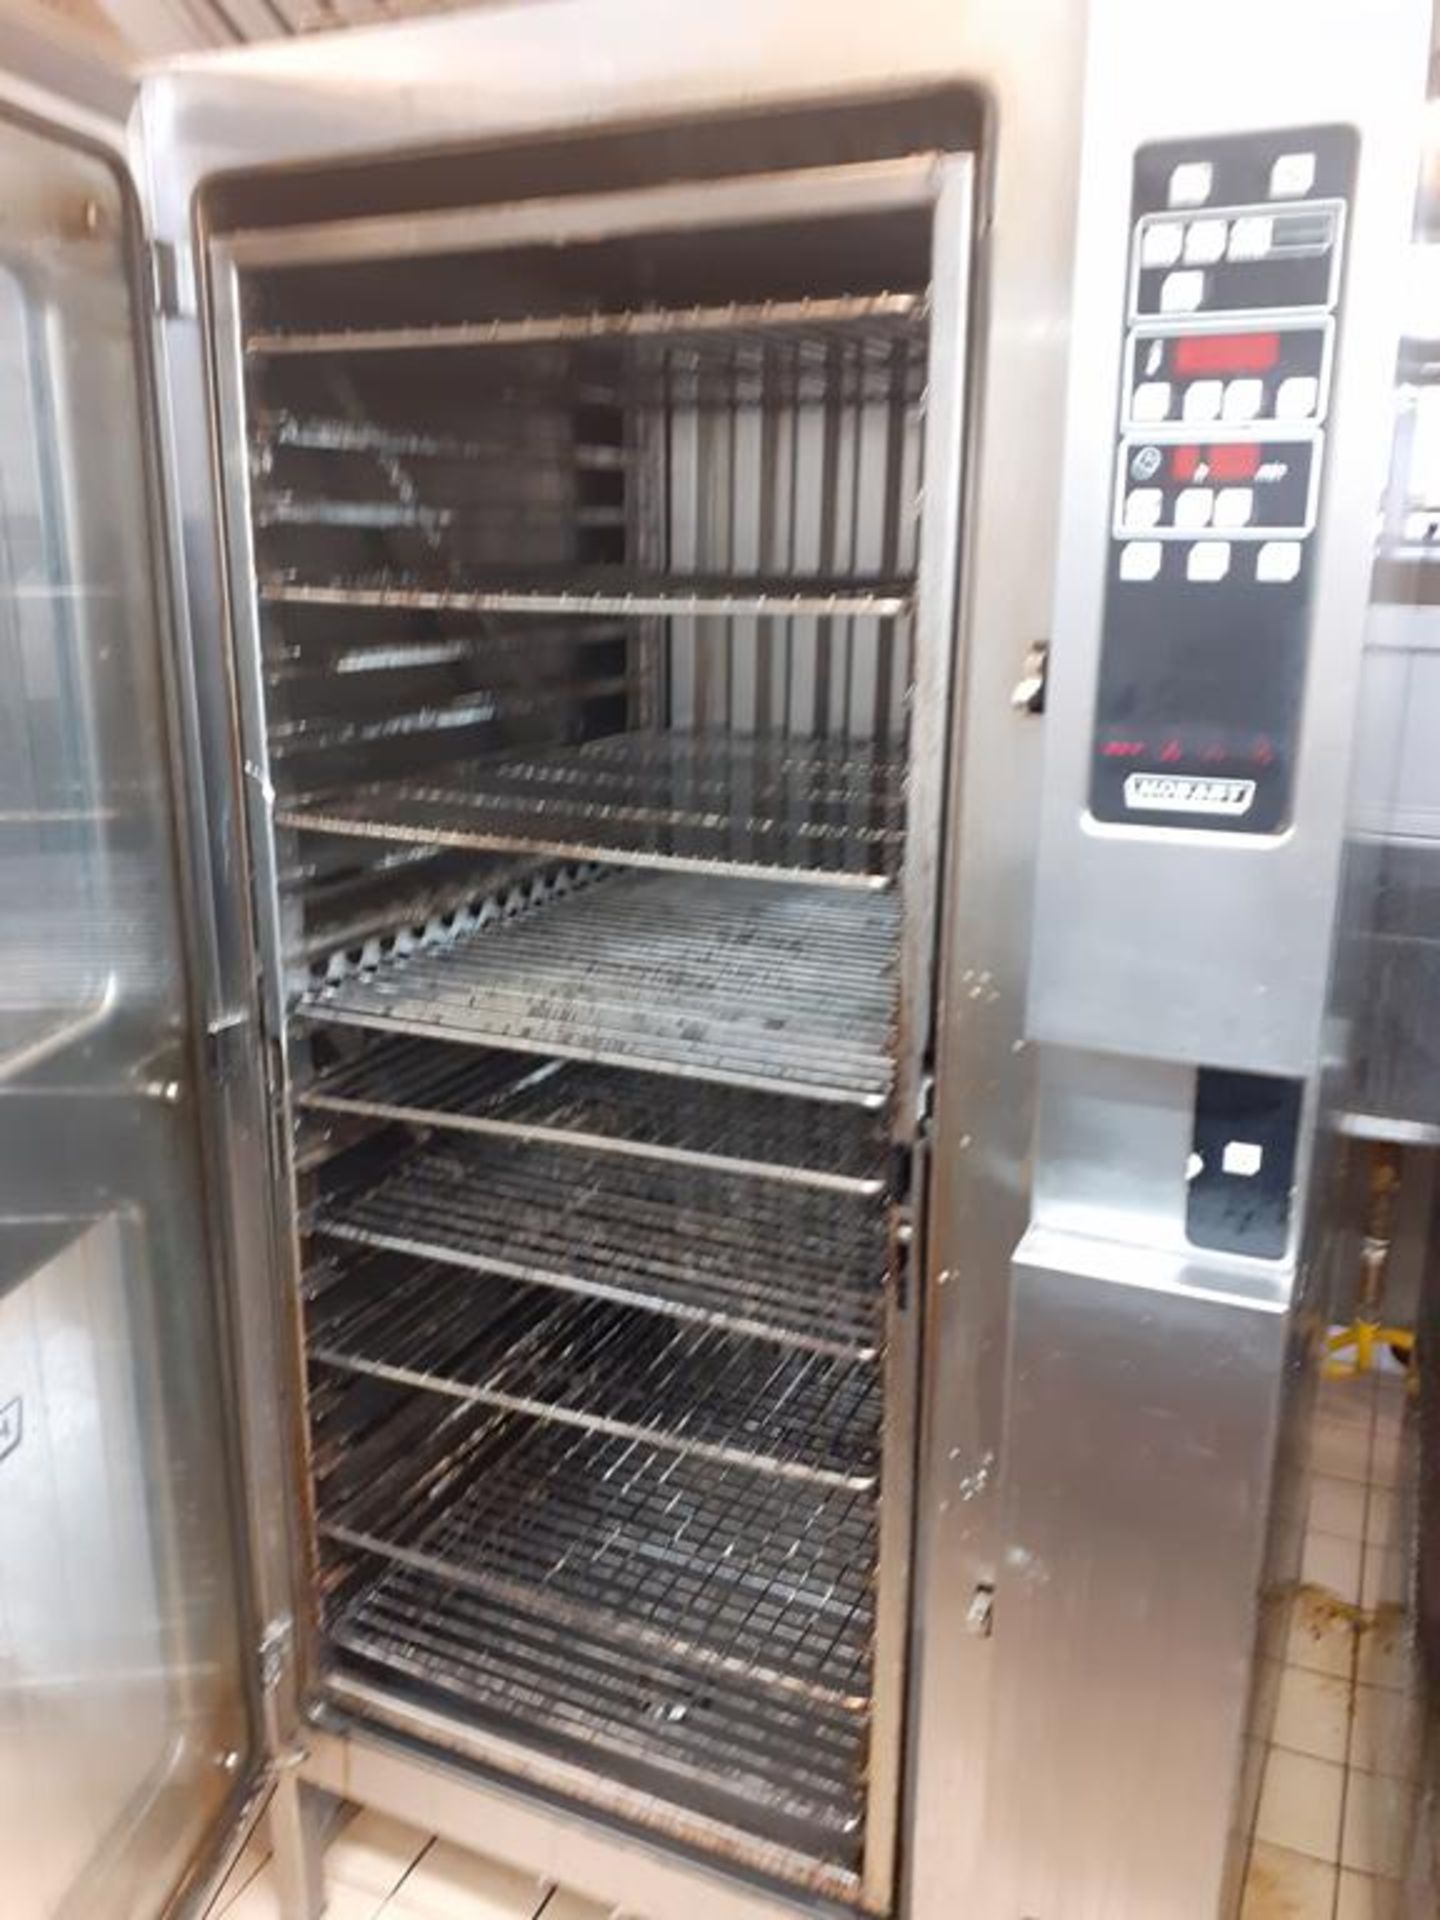 Hobart CD-2021E 20Grid Combi Electric Oven - Image 3 of 5